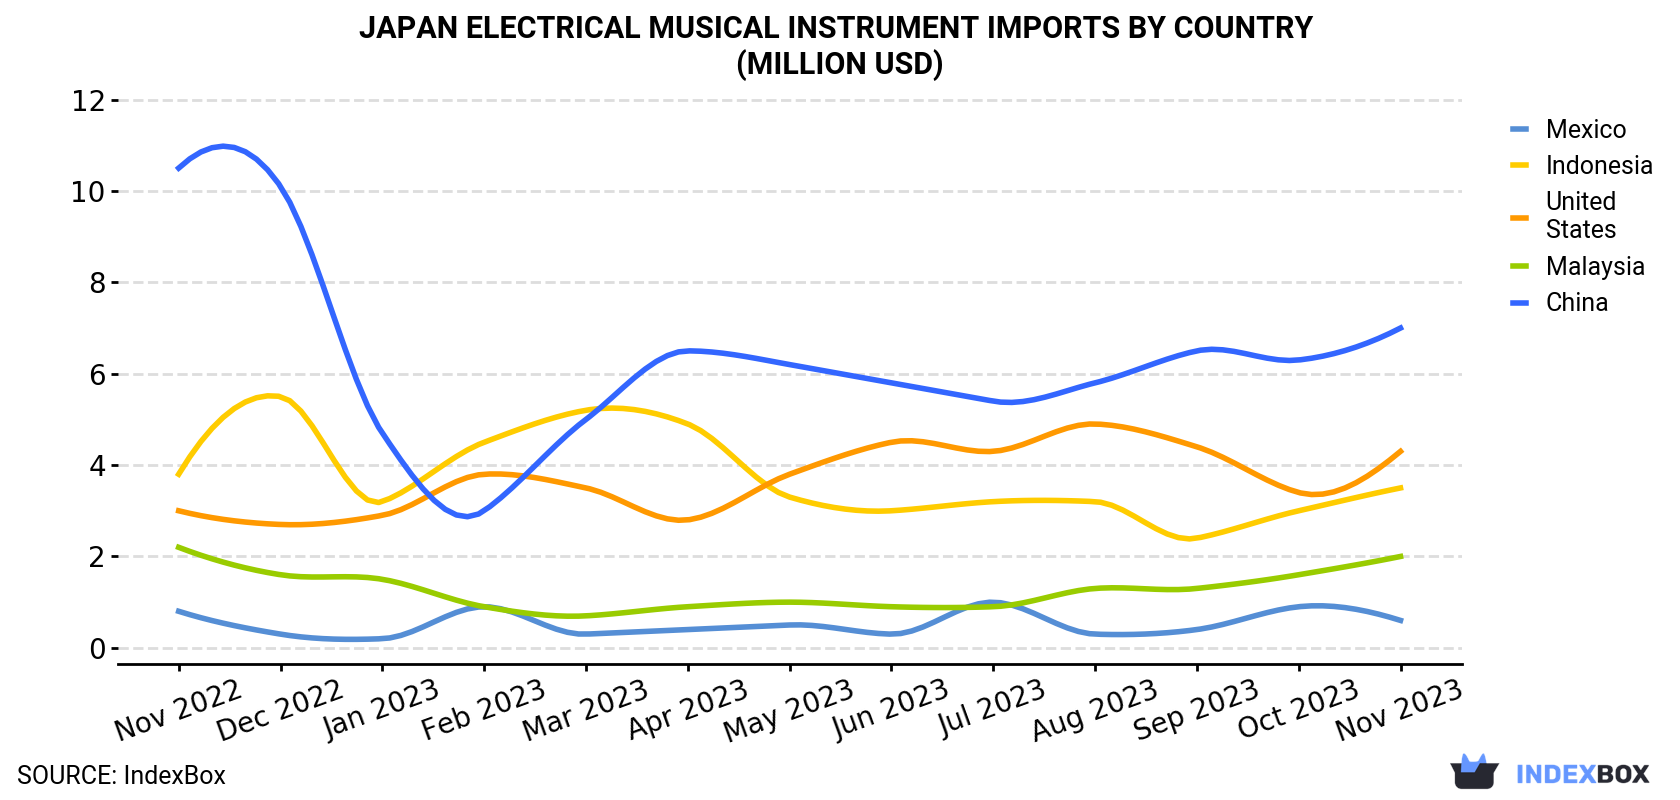 Japan Electrical Musical Instrument Imports By Country (Million USD)